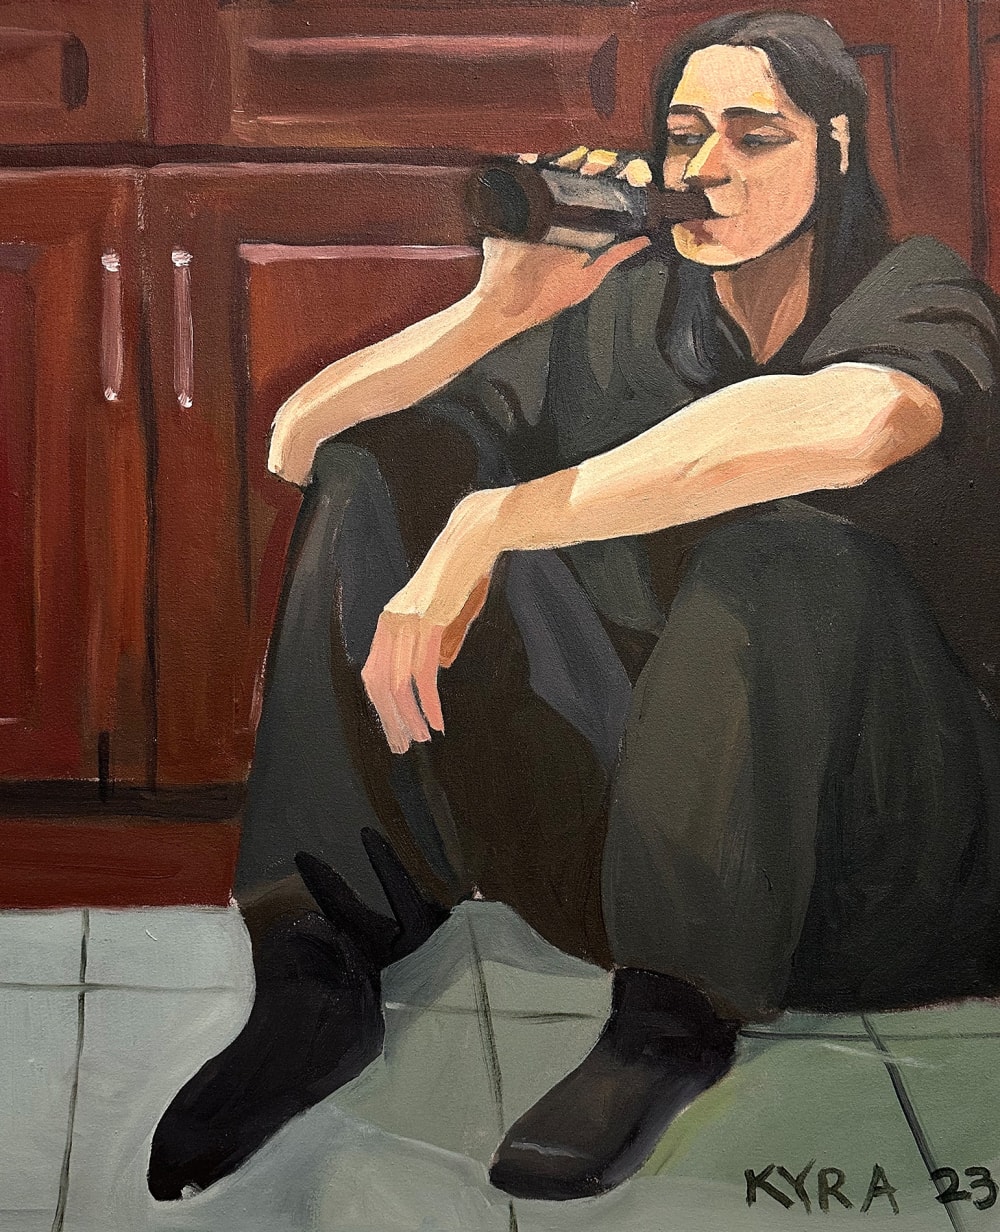 Kyra Gregory, Self Portrait With Beer, Image courtesy of the artist